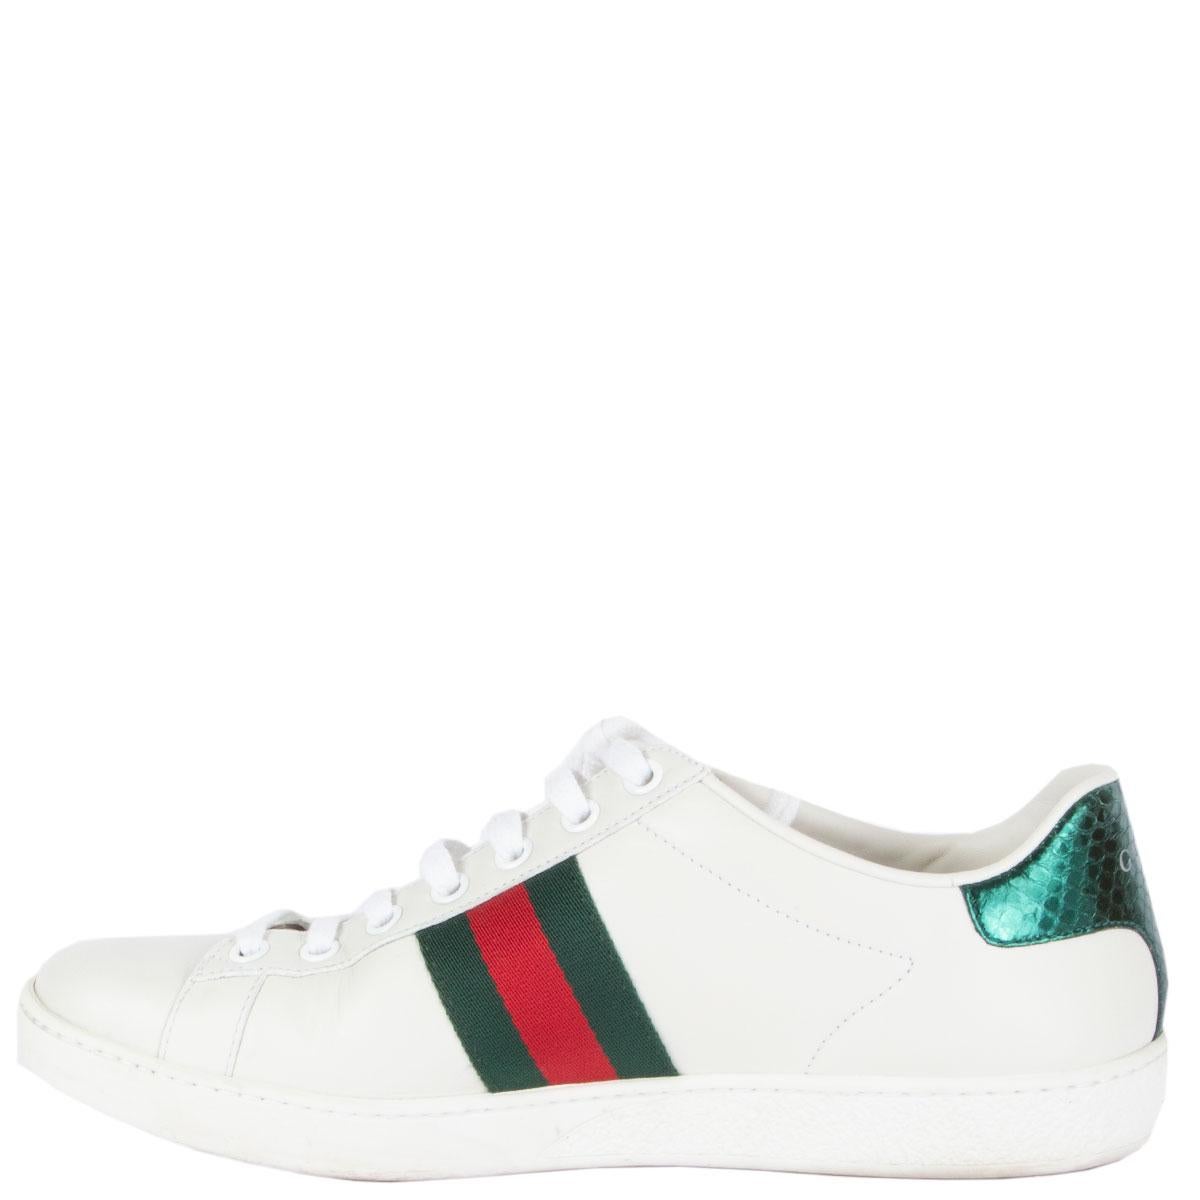 Gray GUCCI white leather ACE BEEN Sneakers Shoes 38